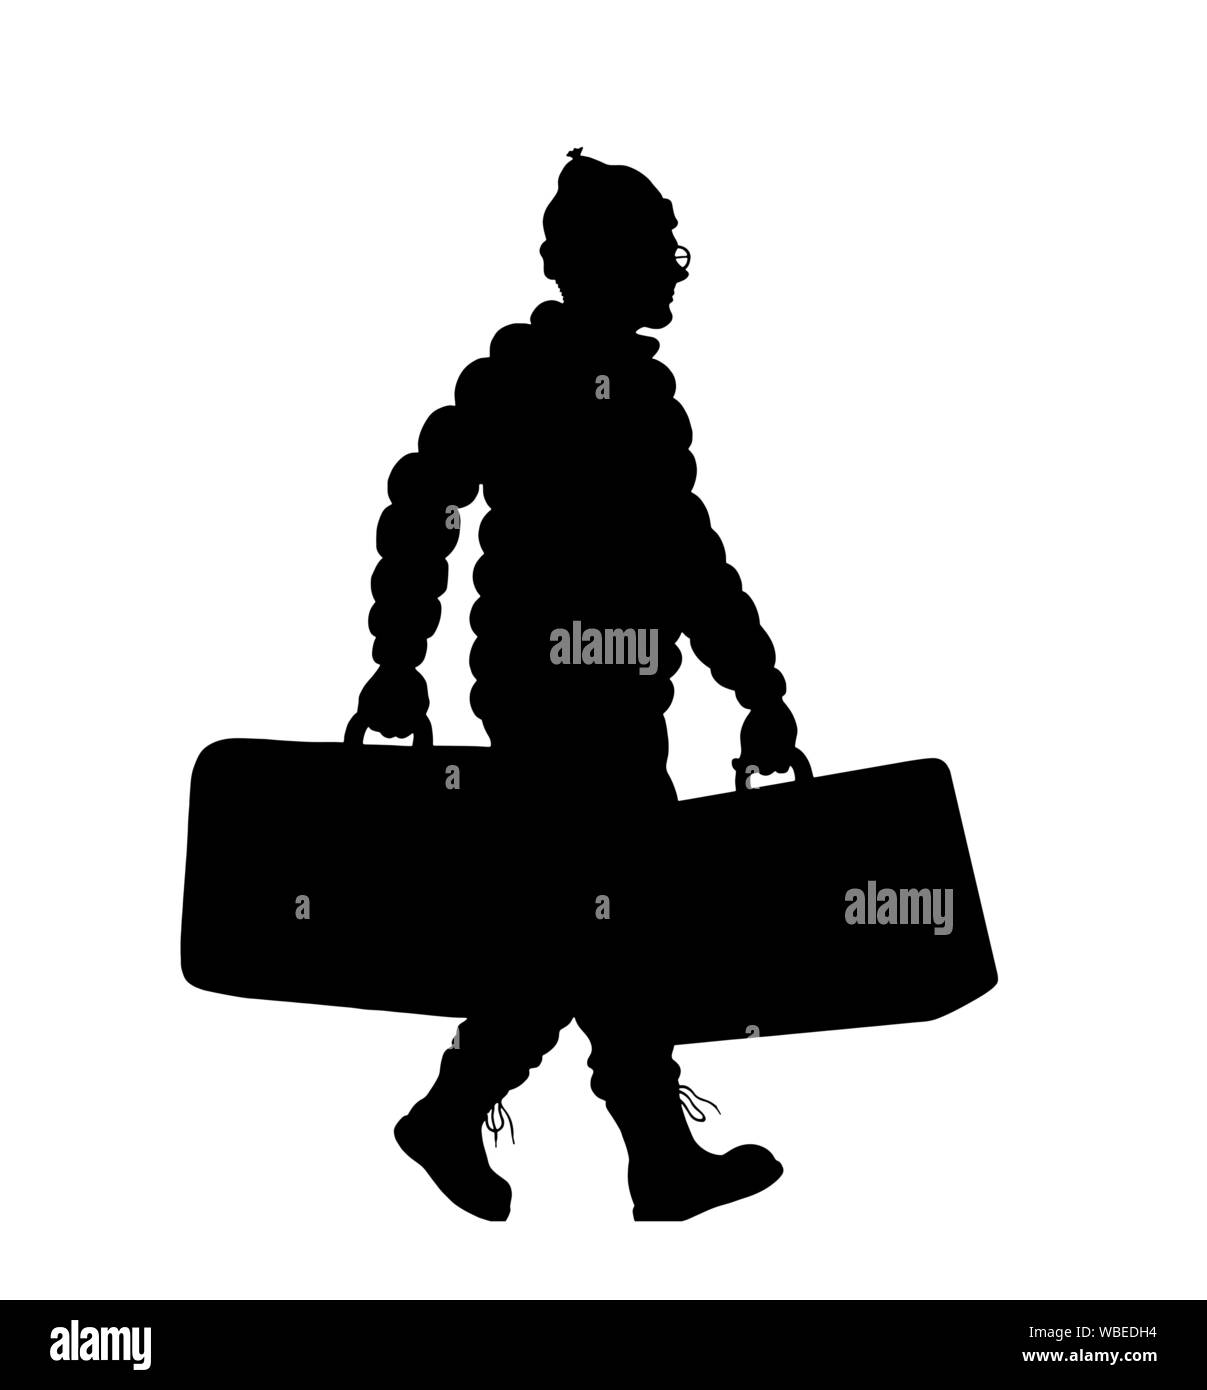 Immigrant man silhouette with valises. The silhouette objects and background are in different layers. Stock Vector